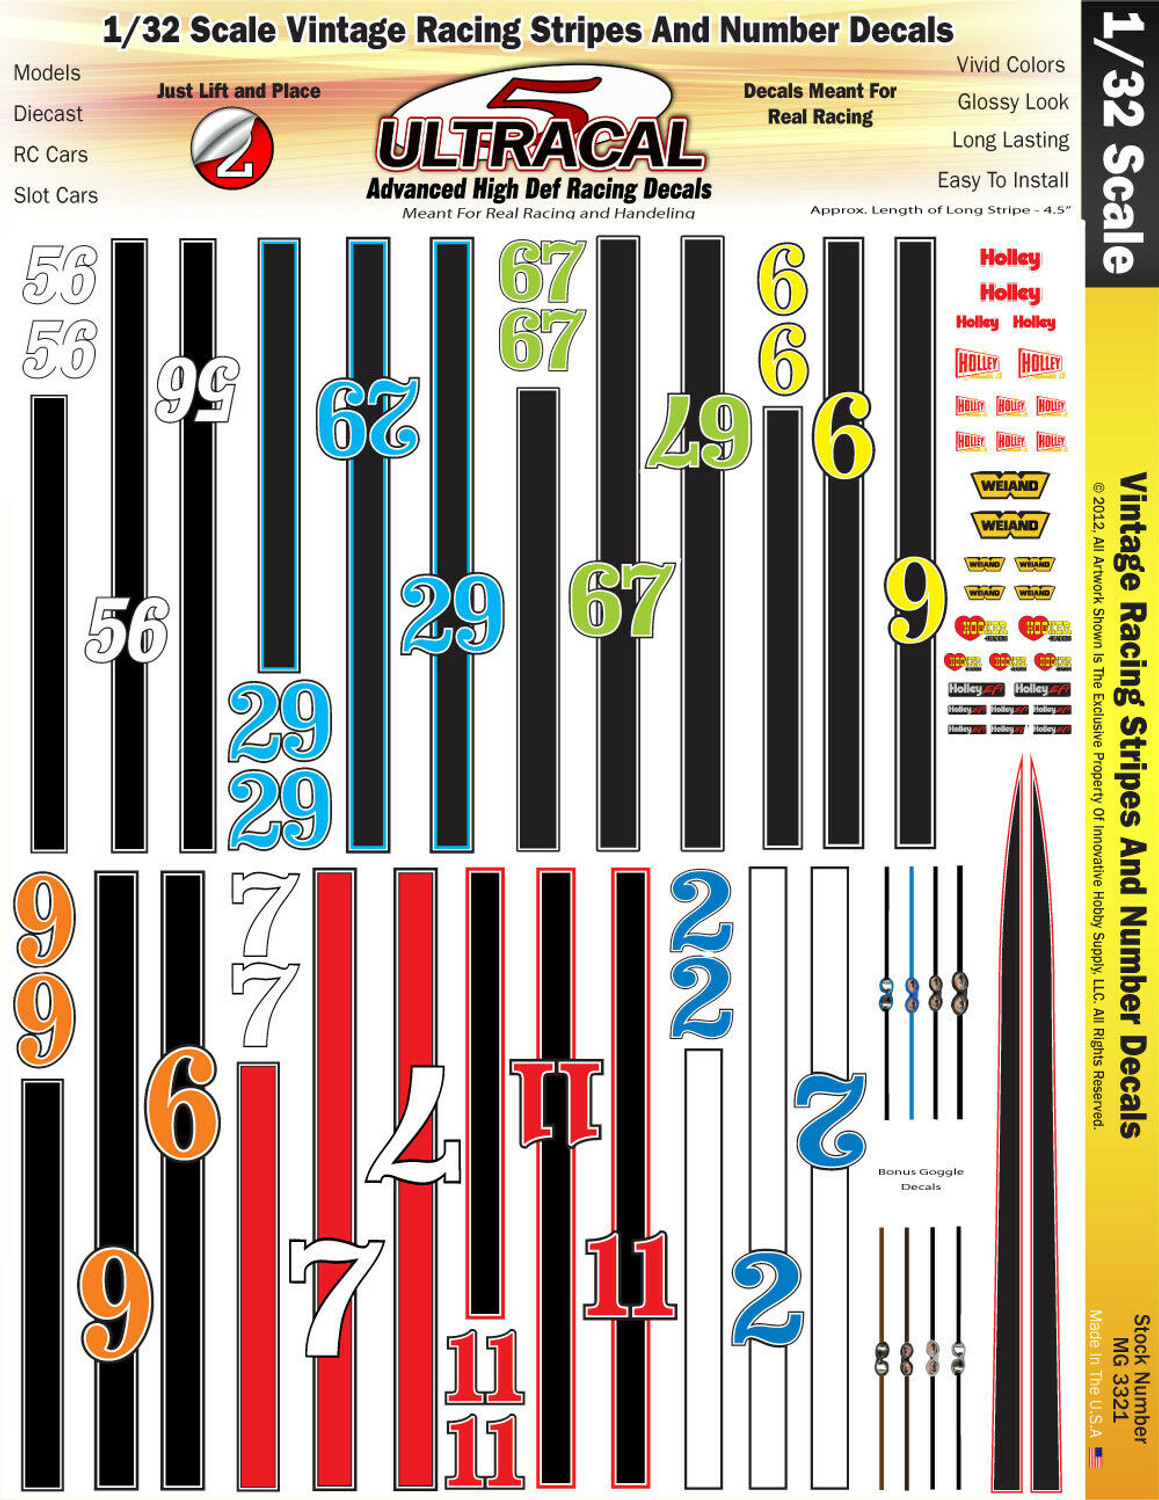 MG 3321 Ultracal Vintage Racing Stripes and Number Decals for 1:32 Scale Applications